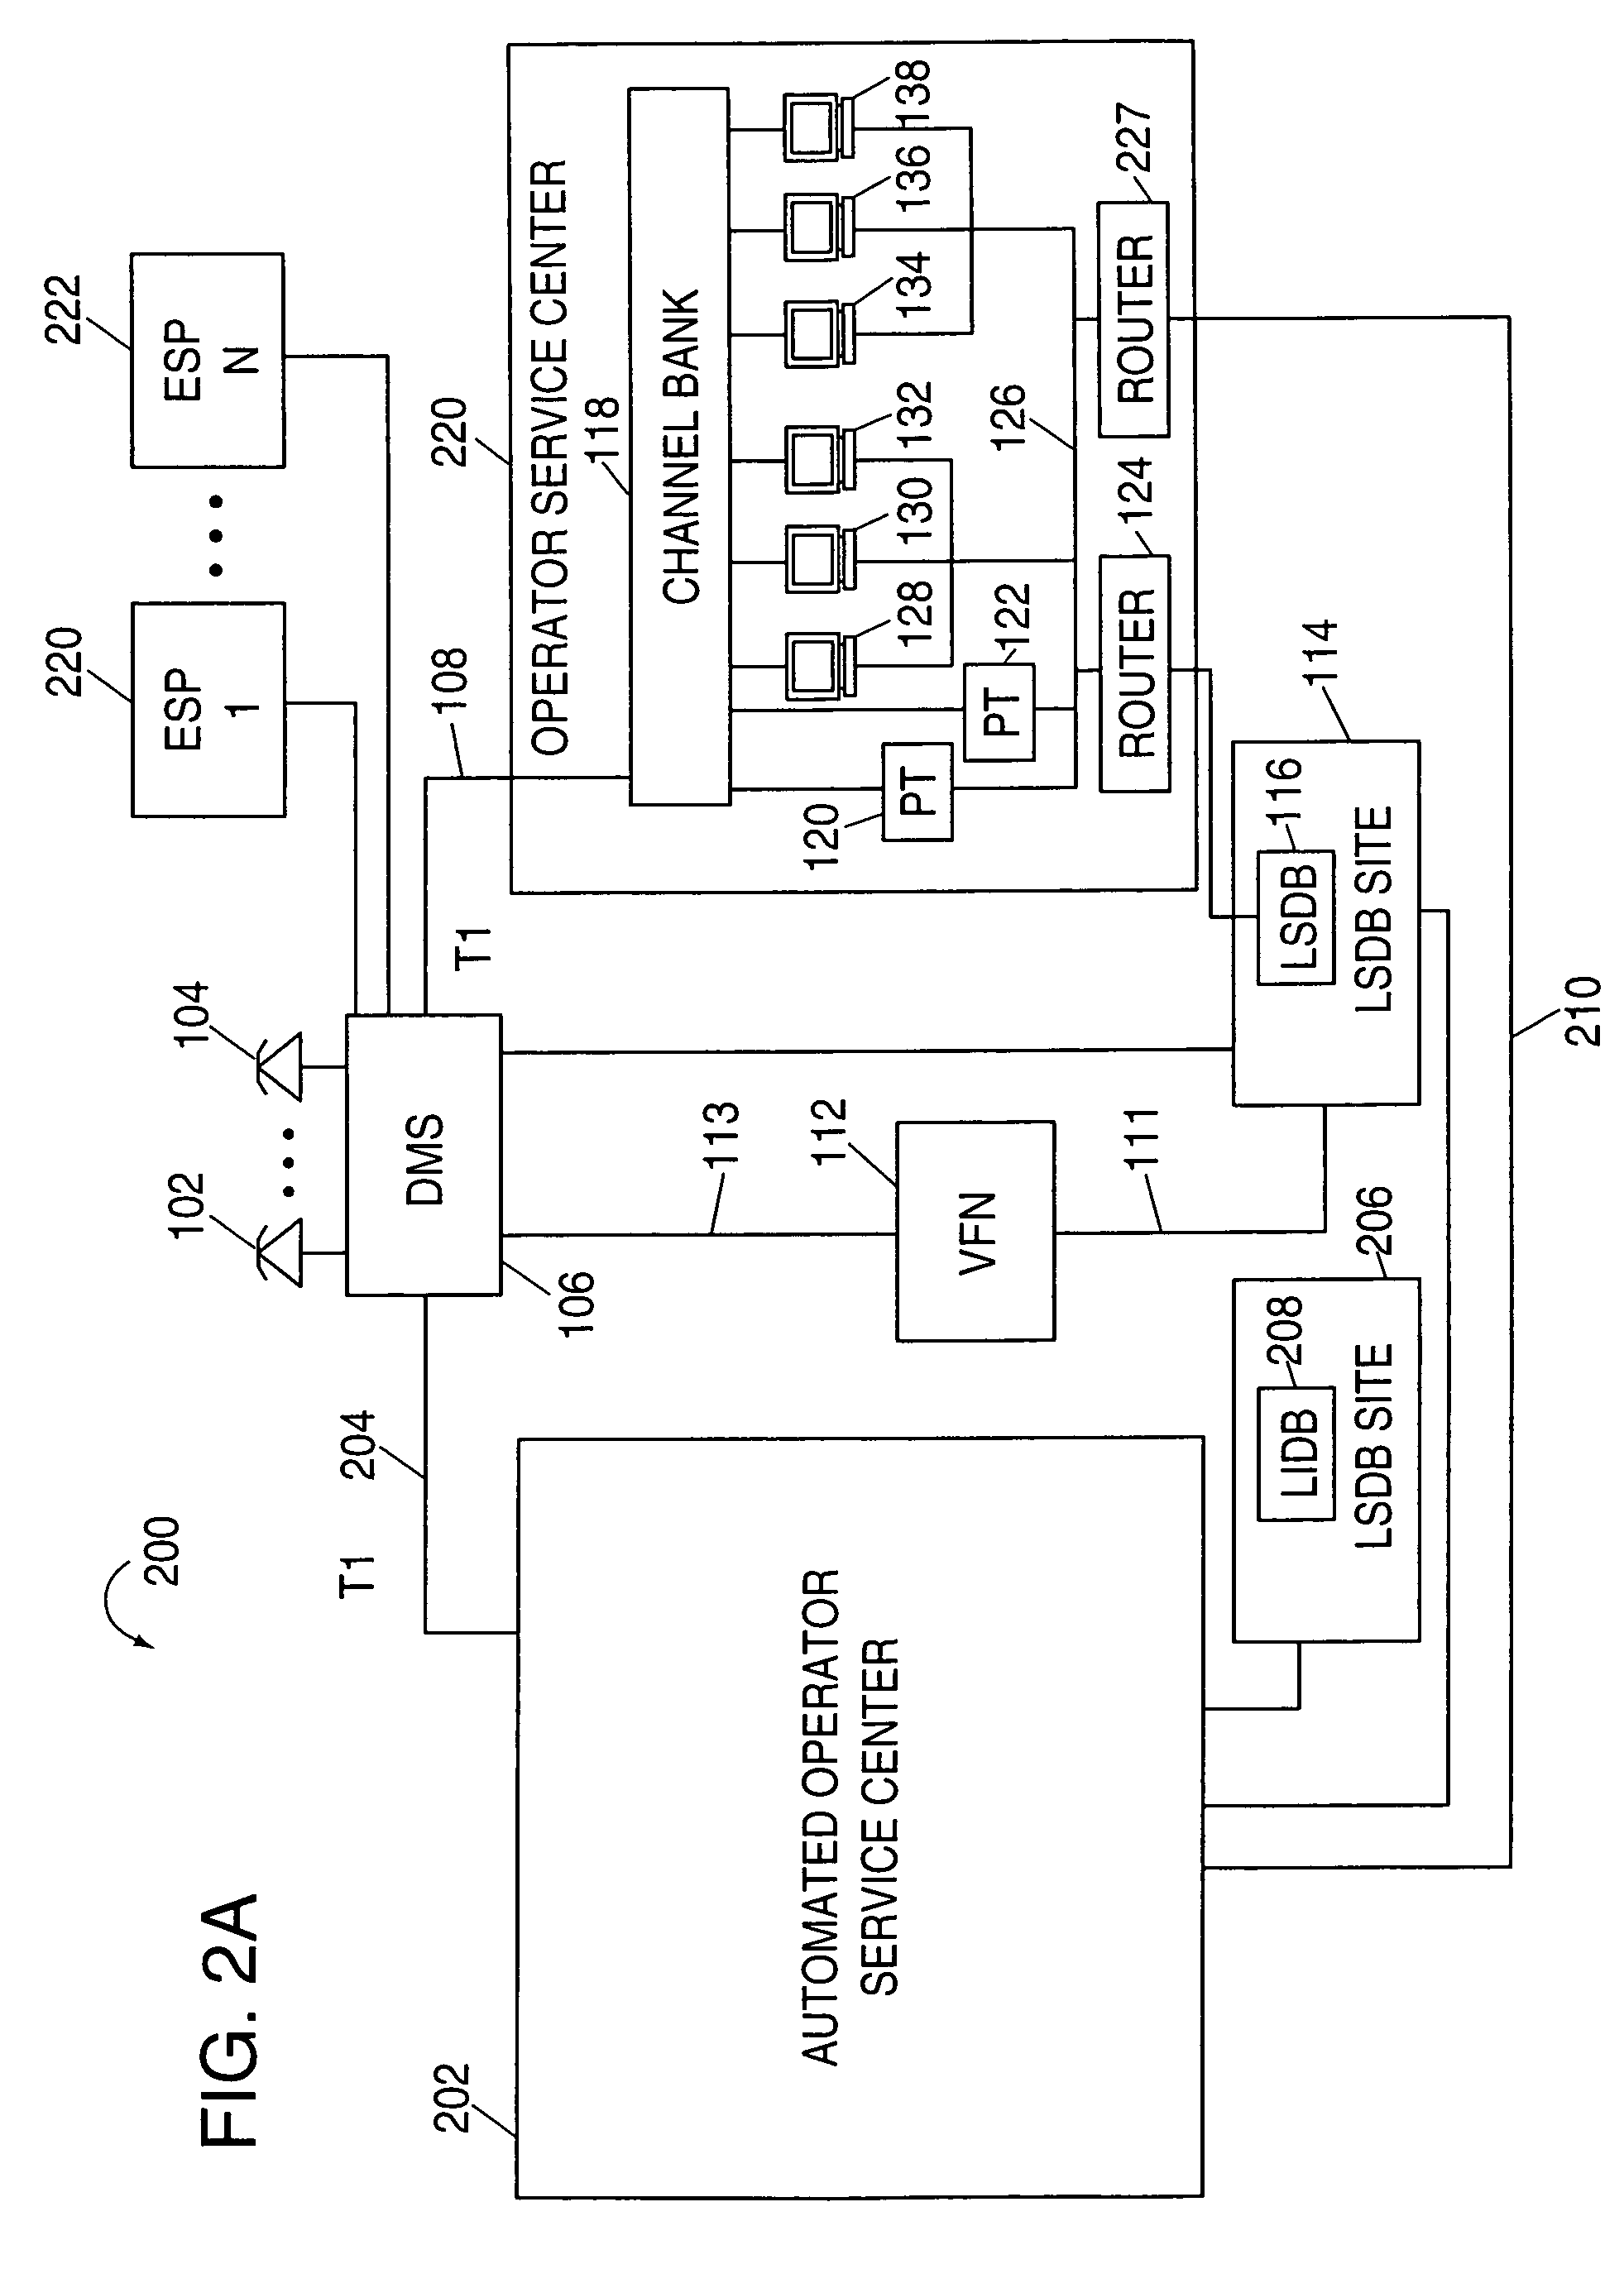 Methods and apparatus for automating the servicing of telephone calls including requesting directional and/or other types of information